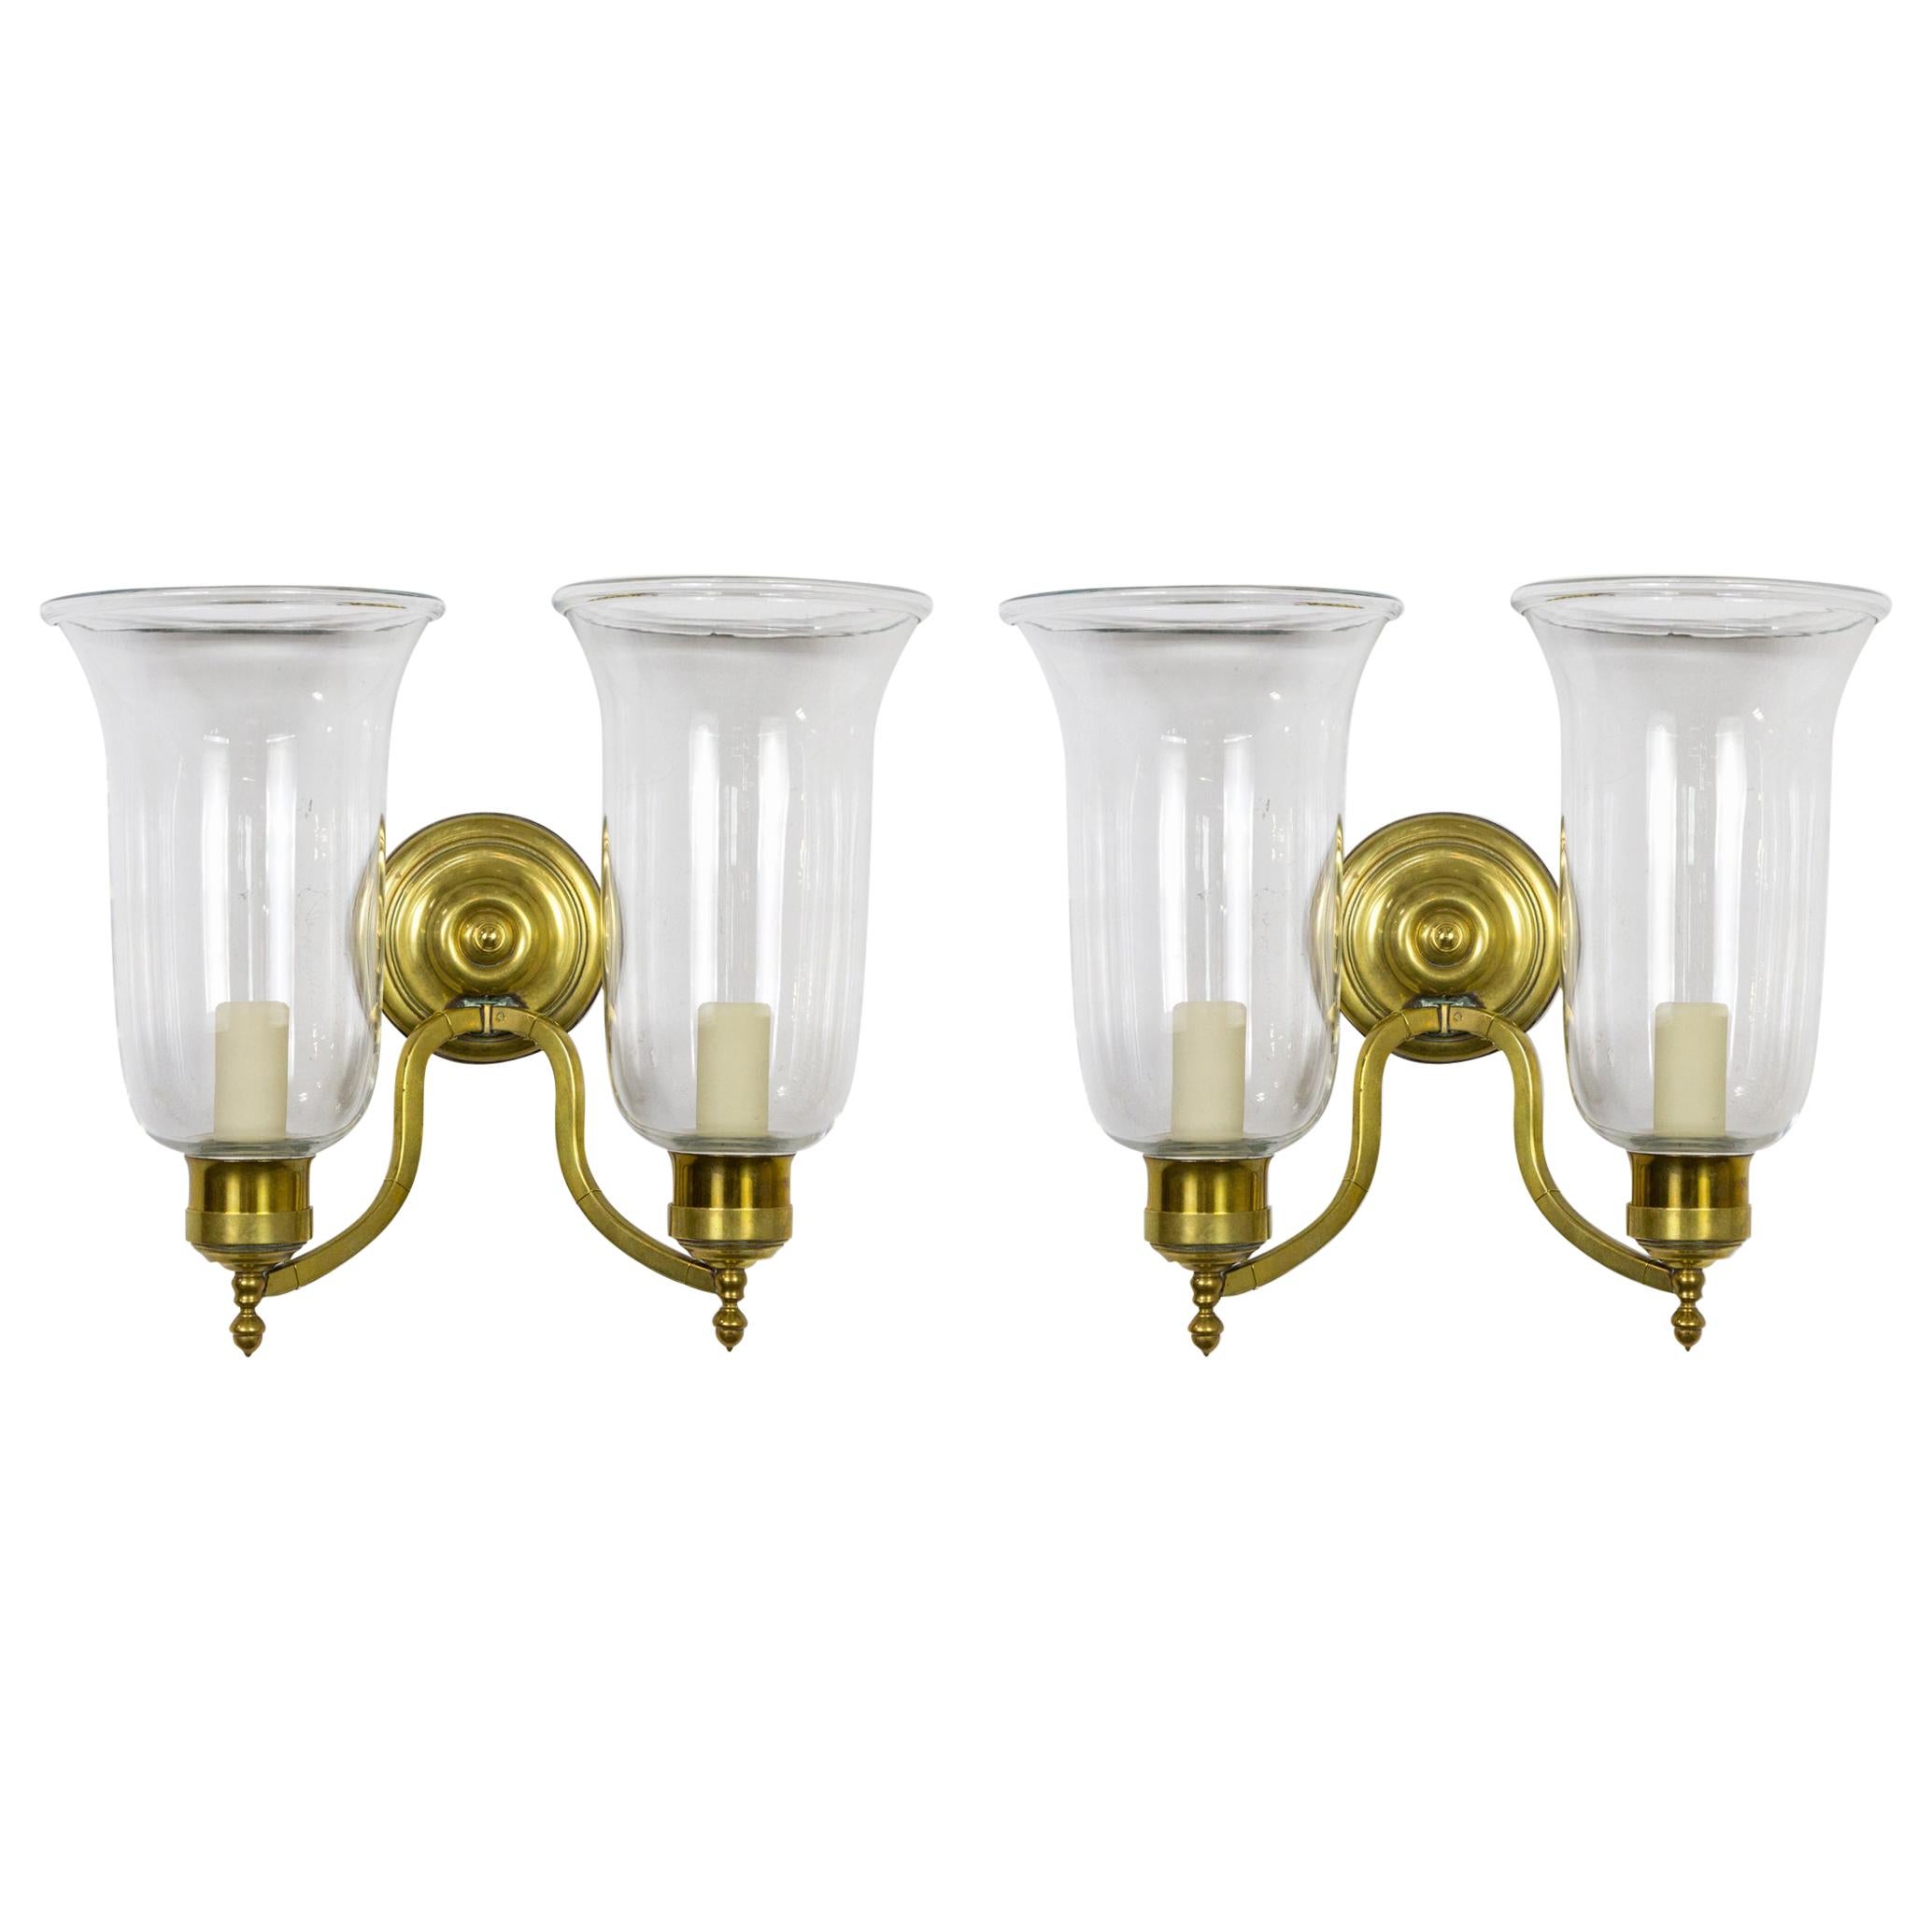 Pair of 2-Arm Brass Hurricane Sconces with Spiral Back Plate